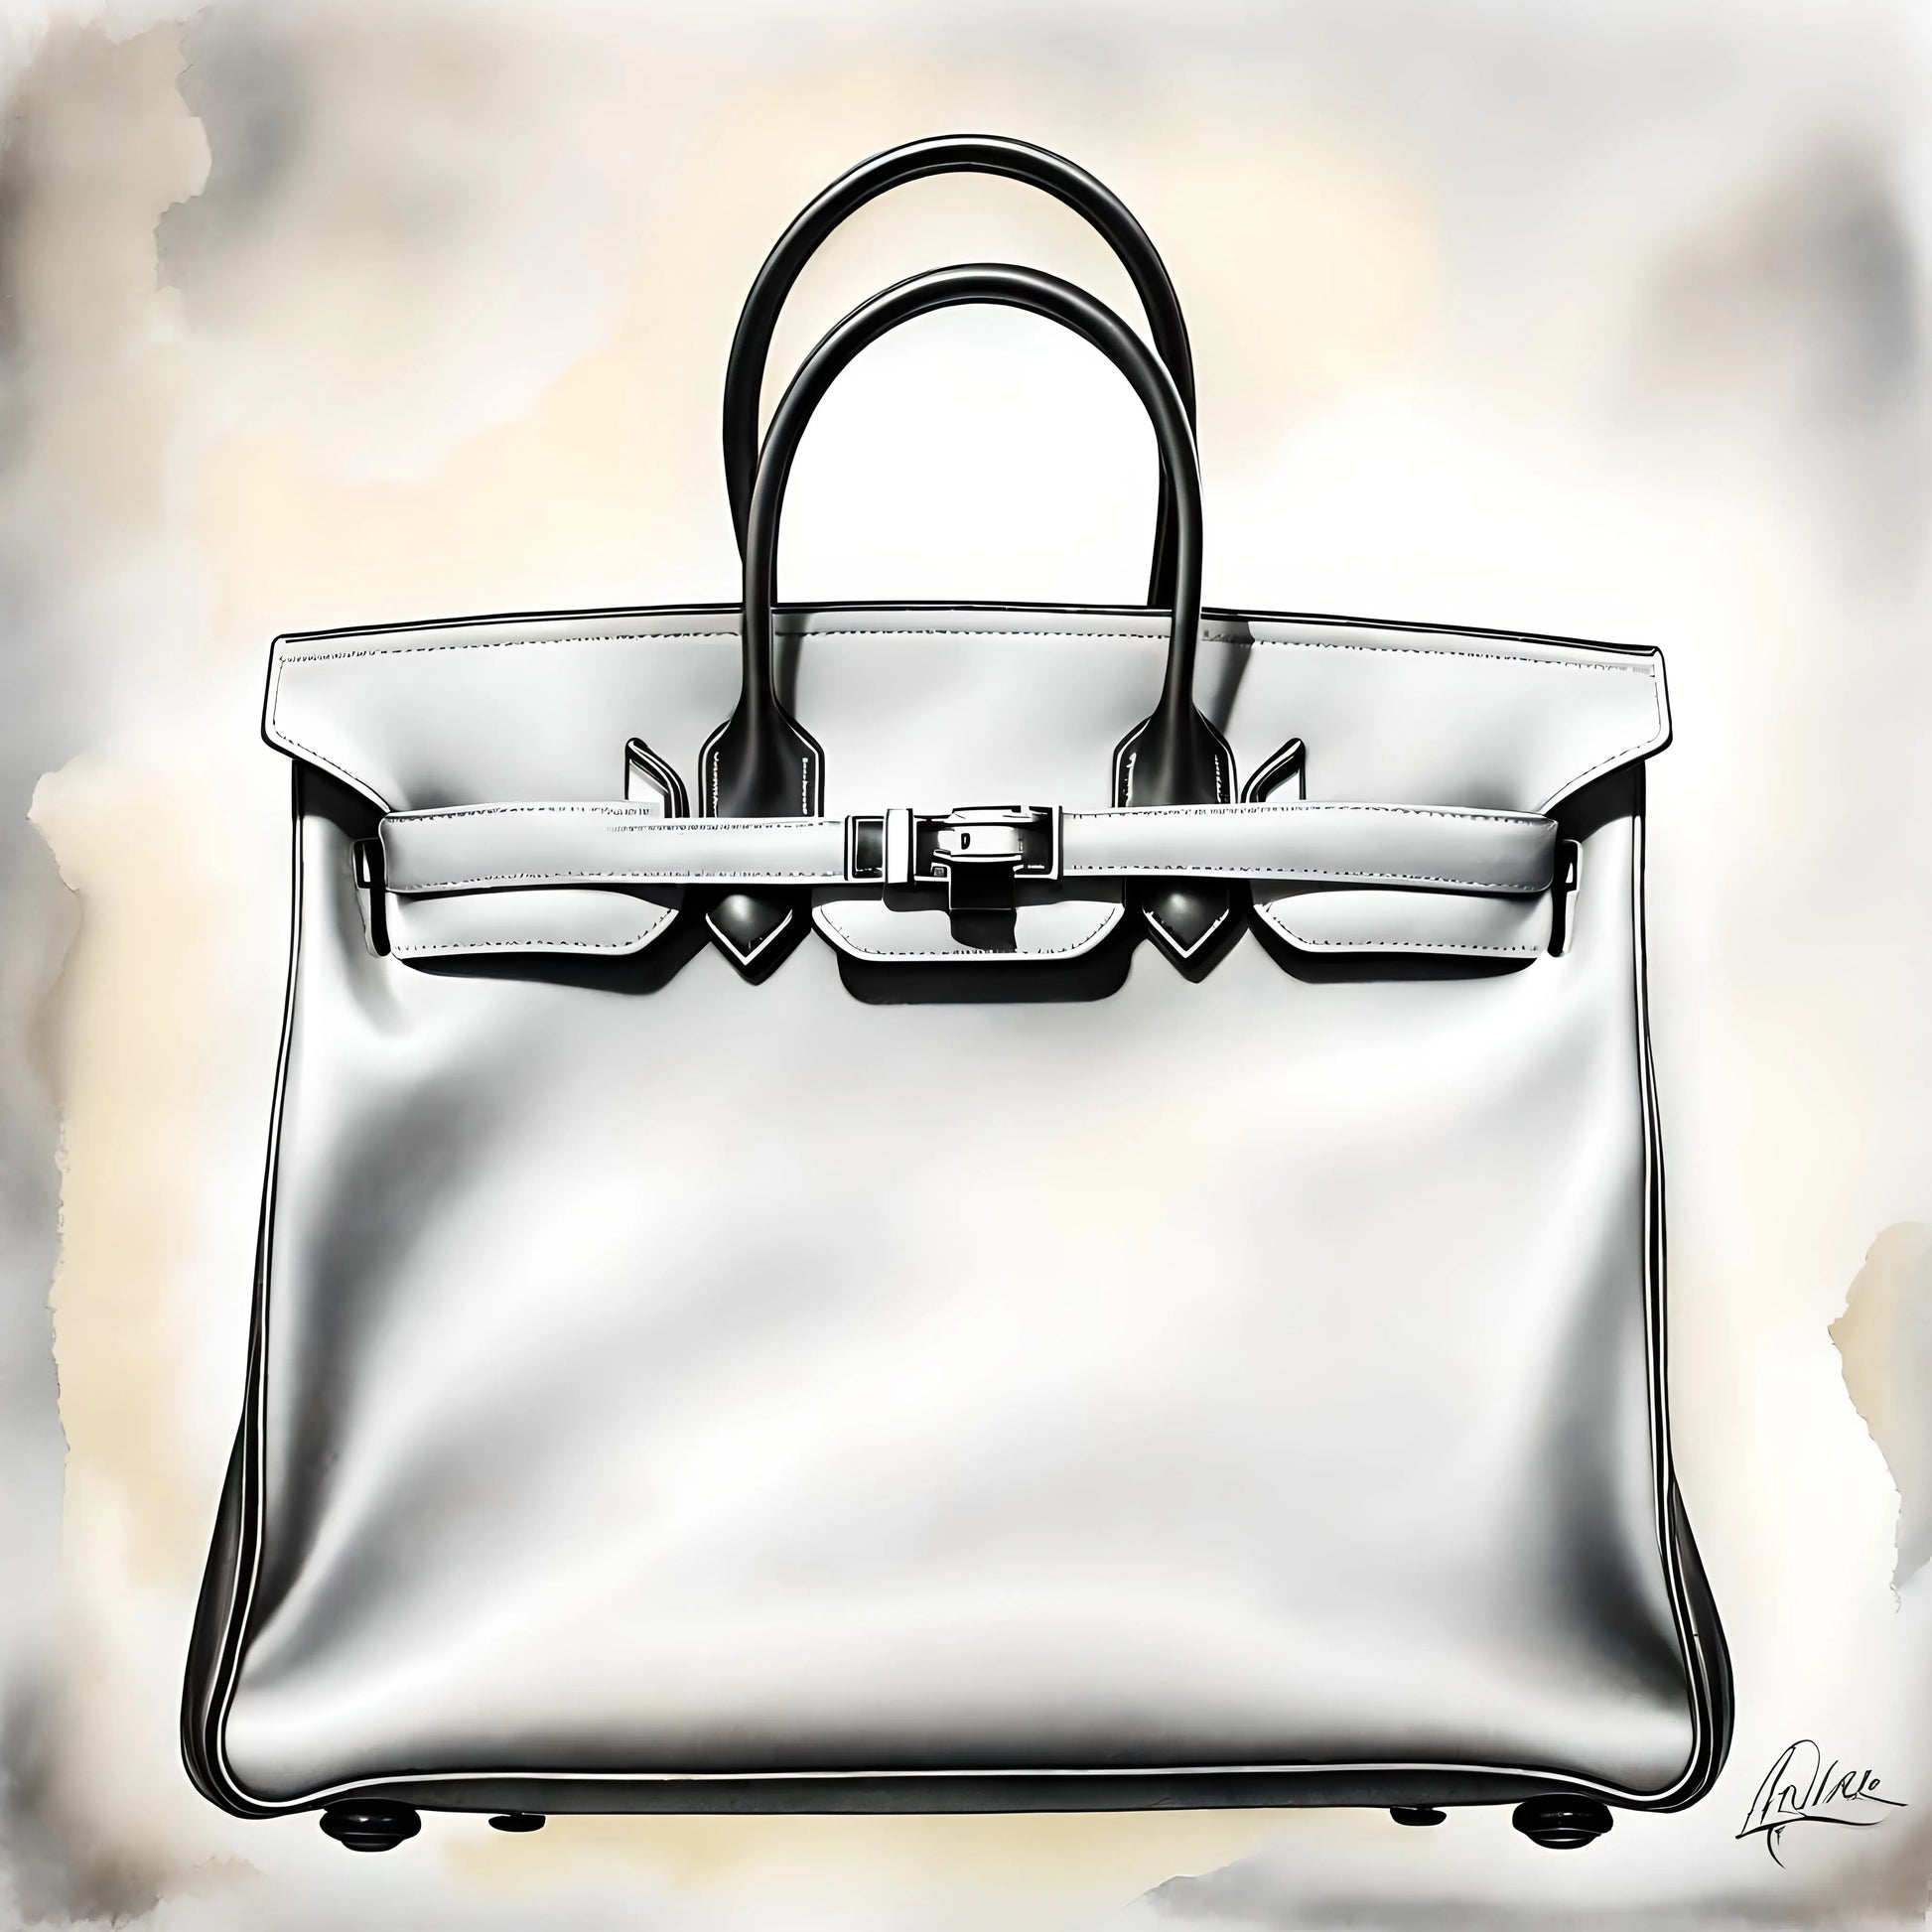 Exquisite Drawing of Hermes Birkin Tote TRY A PROMPT